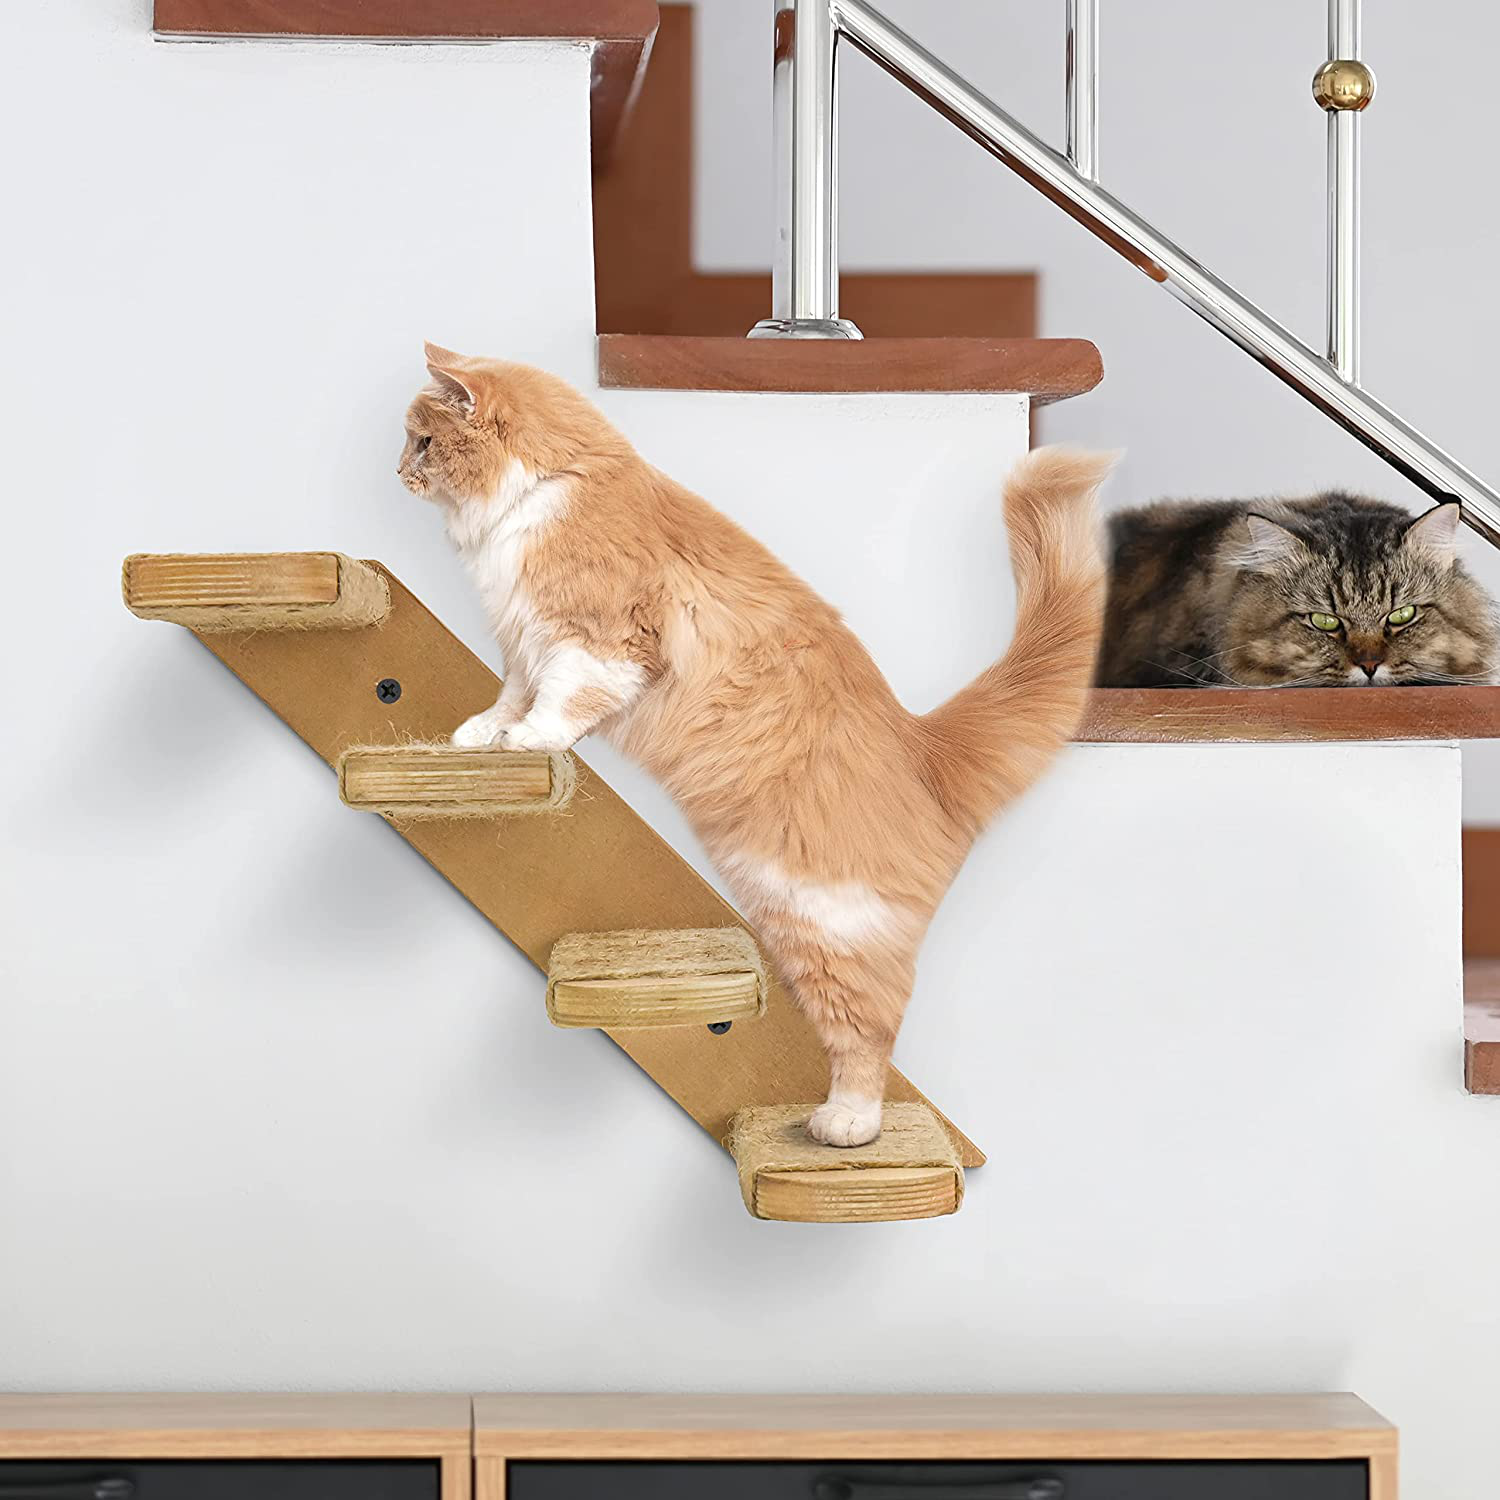 Cat Wall Shelves, Cat Wall Furniture, Cat Stairs Cat Shelves and Perches for Wall, Cat Ladder Cat Wall Steps for Scratching and Climbing, Cat Perch Wall Mounted